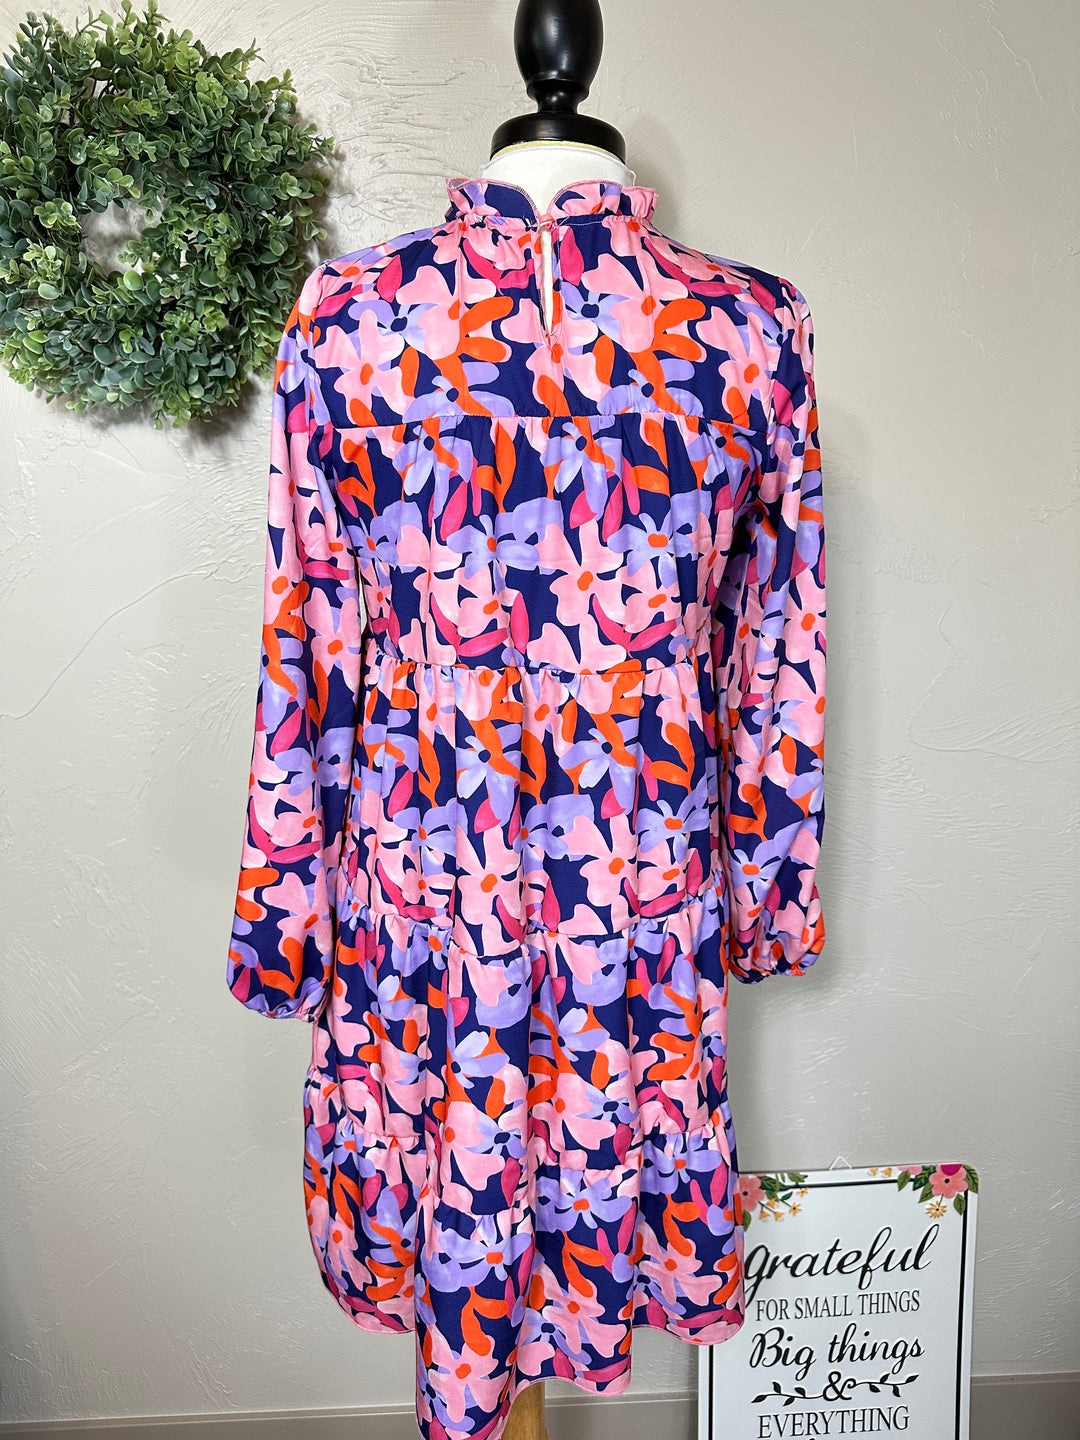 Liza Lou's Tiered Bright Floral Top Dress